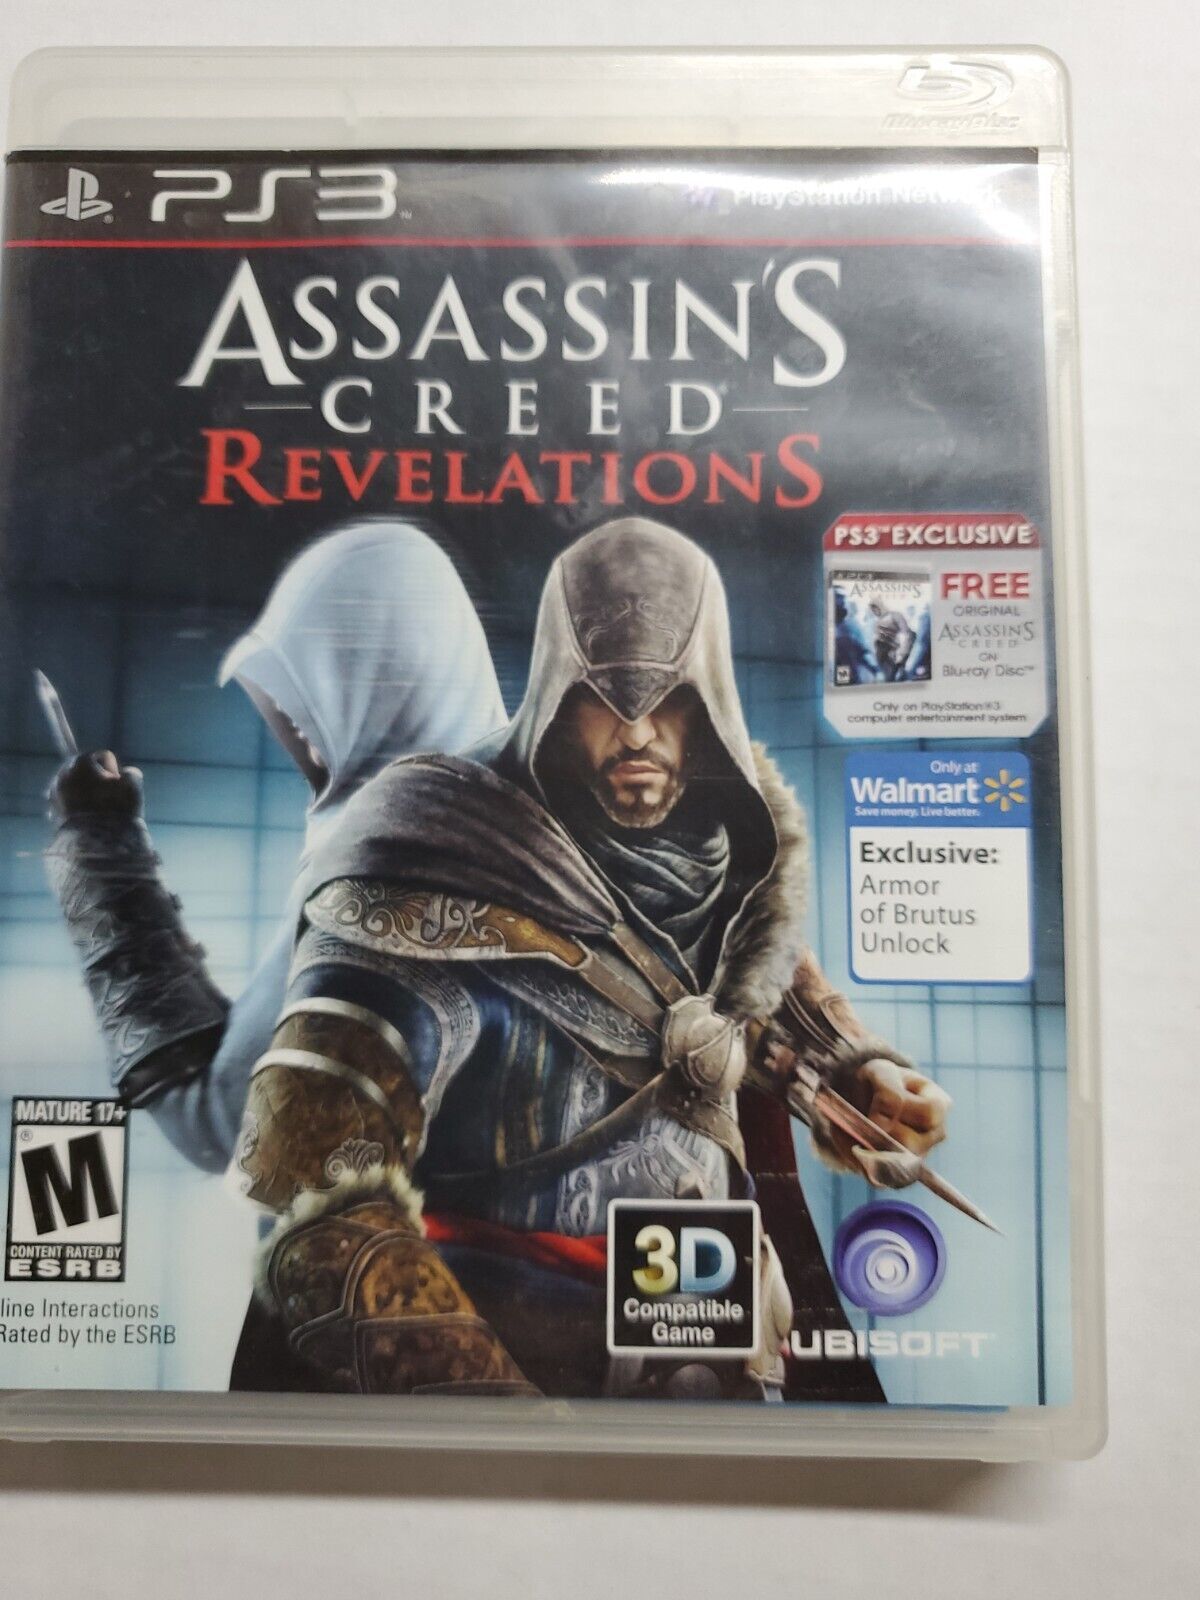 Primary image for Assassin's Creed: Revelations (Sony PlayStation 3, 2011)